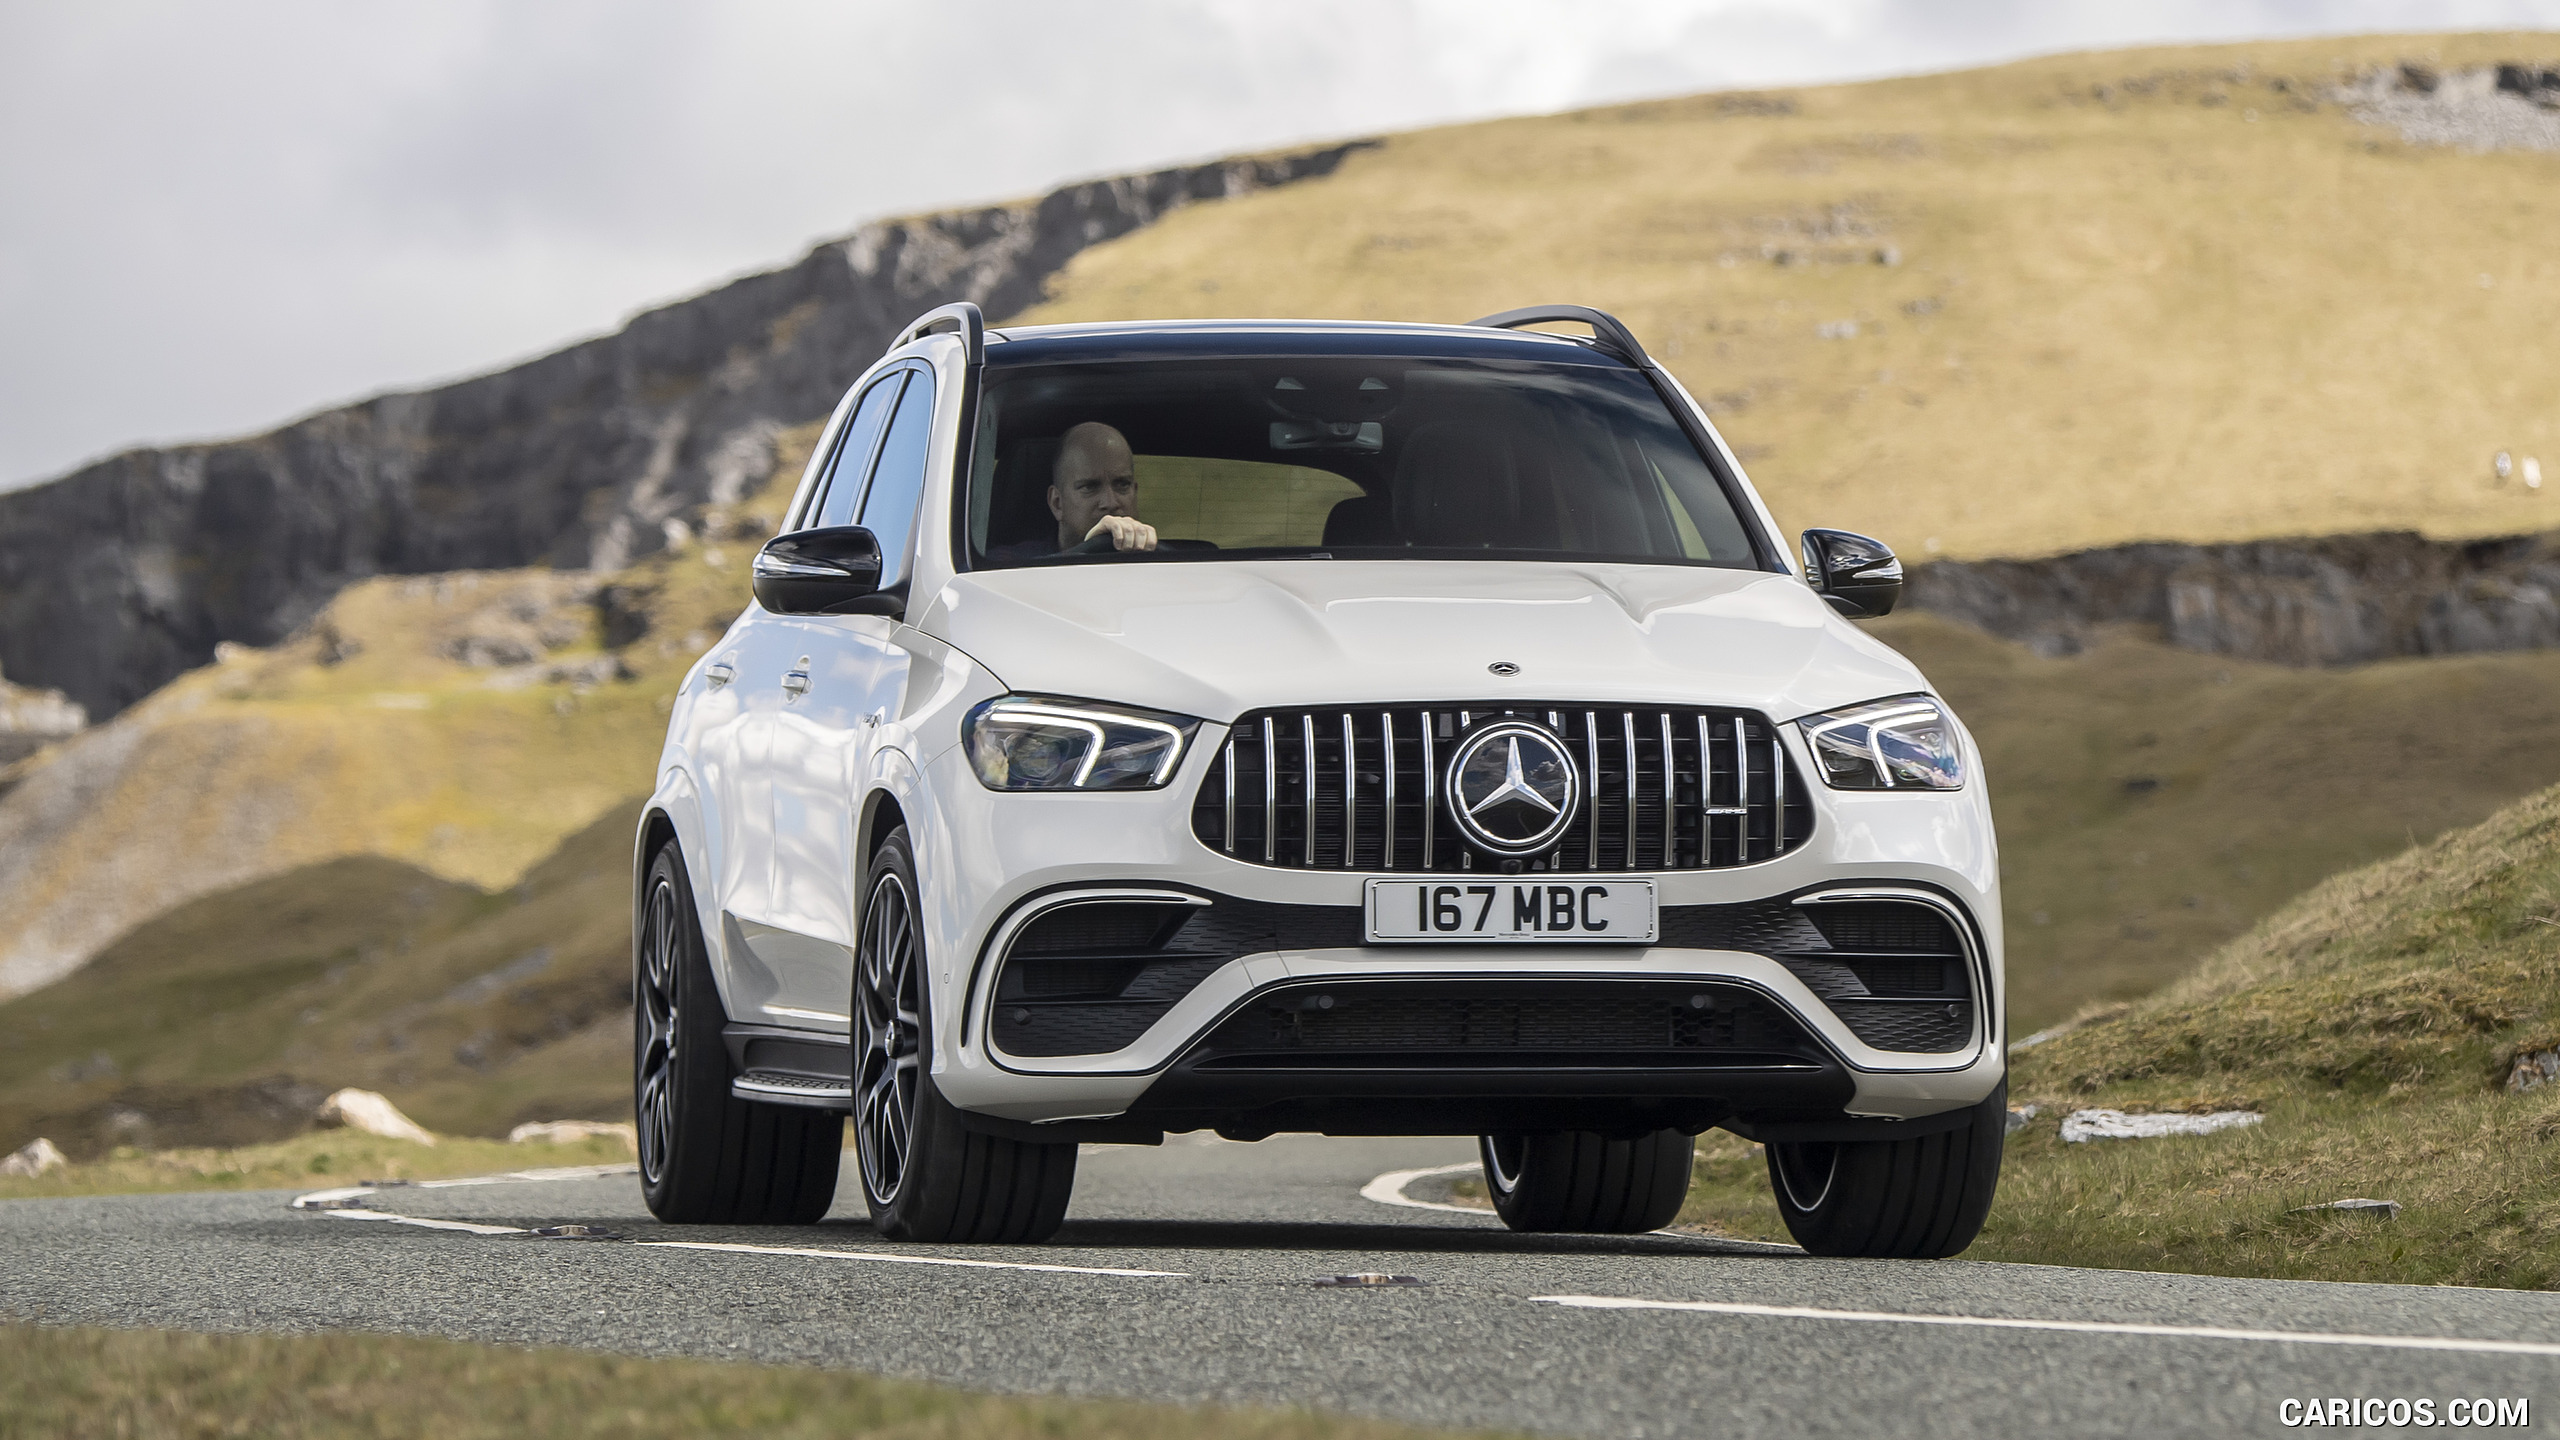 2021 Mercedes-AMG GLE 63 S 4MATIC (UK-Spec) - Front, #103 of 187